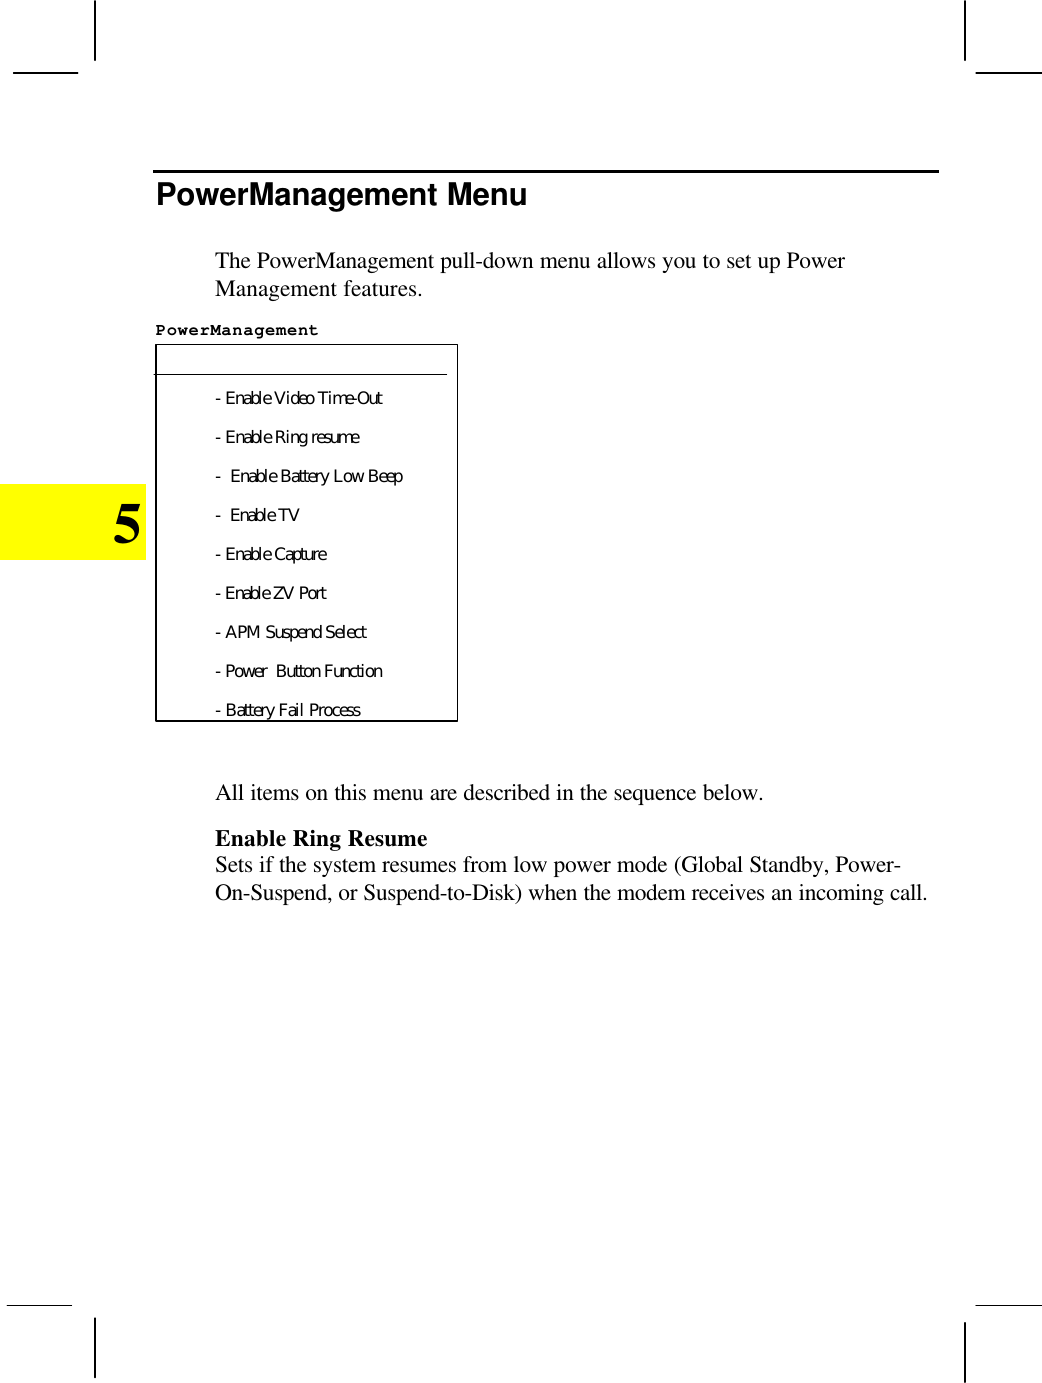 5PowerManagement MenuThe PowerManagement pull-down menu allows you to set up PowerManagement features.PowerManagement - Enable Video Time-Out- Enable Ring resume-  Enable Battery Low Beep-  Enable TV- Enable Capture- Enable ZV Port- APM Suspend Select- Power  Button Function- Battery Fail ProcessAll items on this menu are described in the sequence below.Enable Ring ResumeSets if the system resumes from low power mode (Global Standby, Power-On-Suspend, or Suspend-to-Disk) when the modem receives an incoming call.